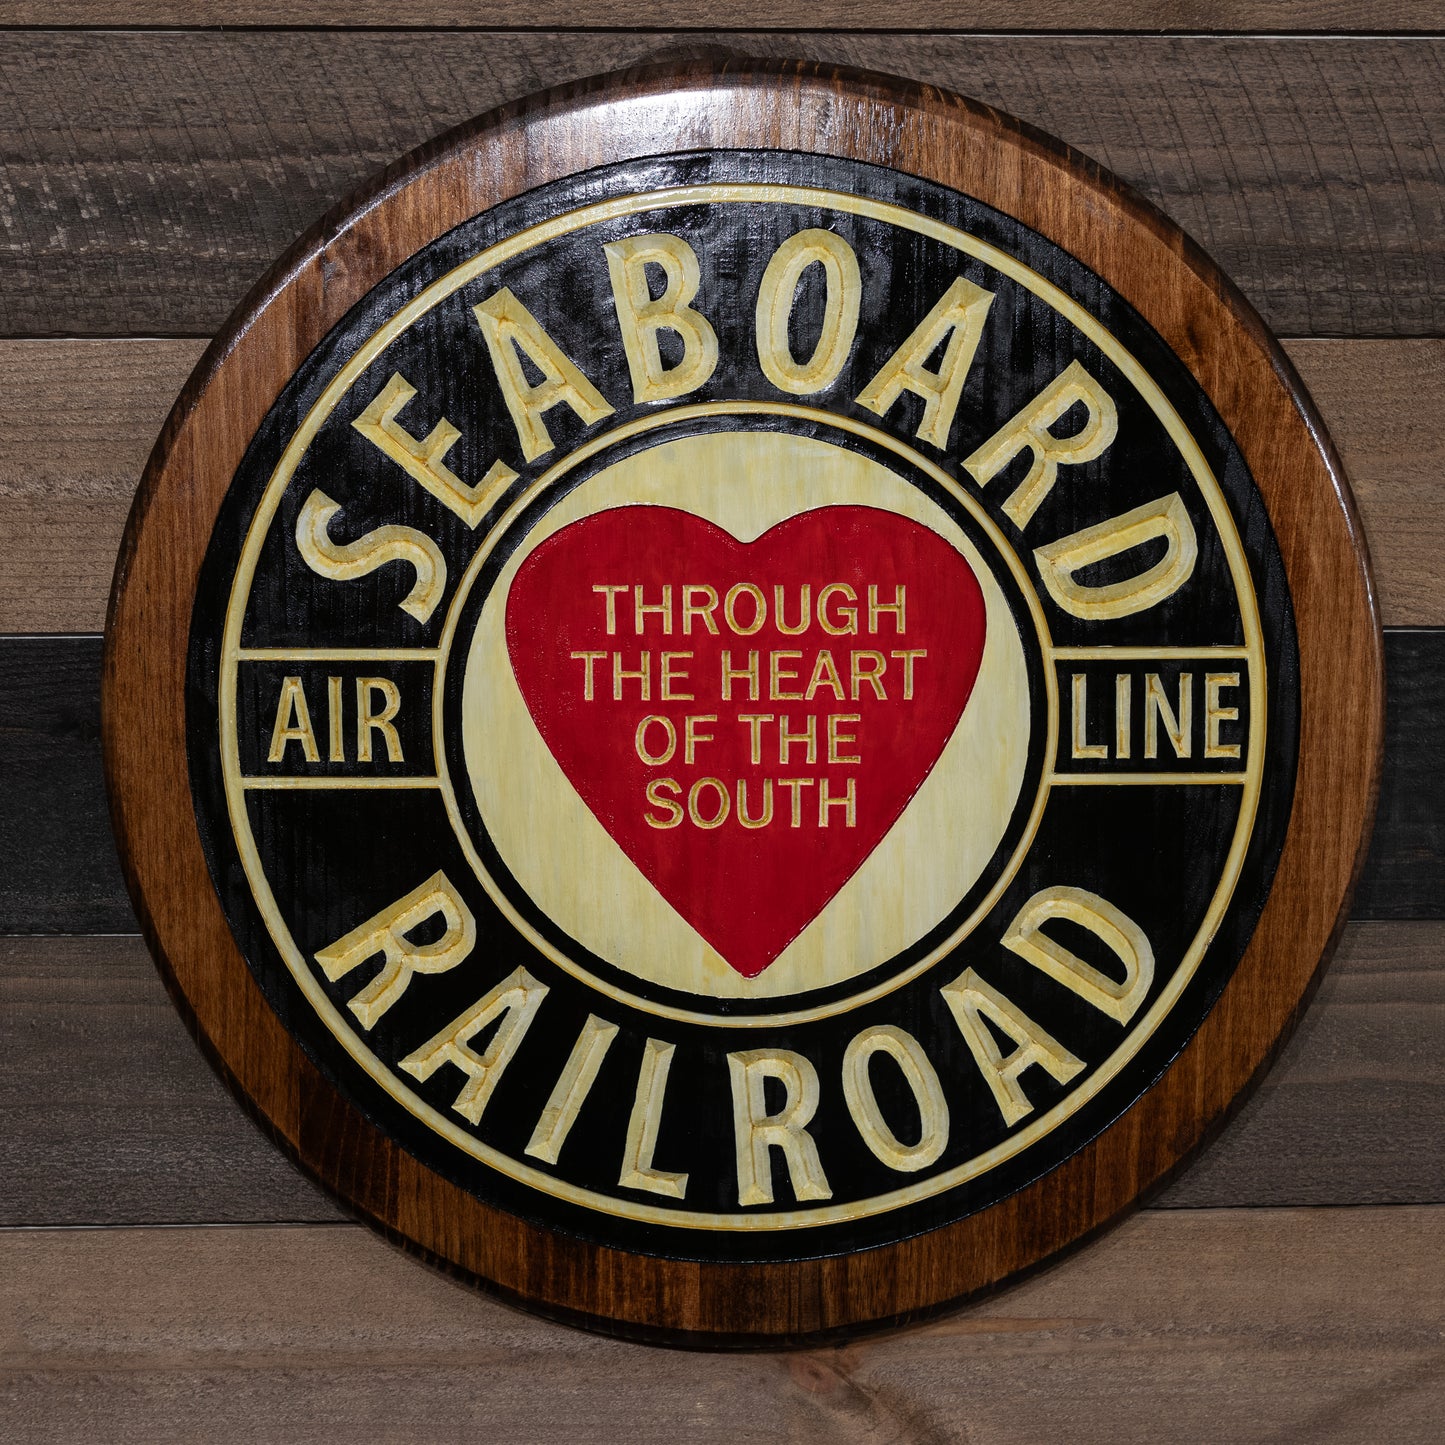 Seaboard Air Line Engraved Wood Sign